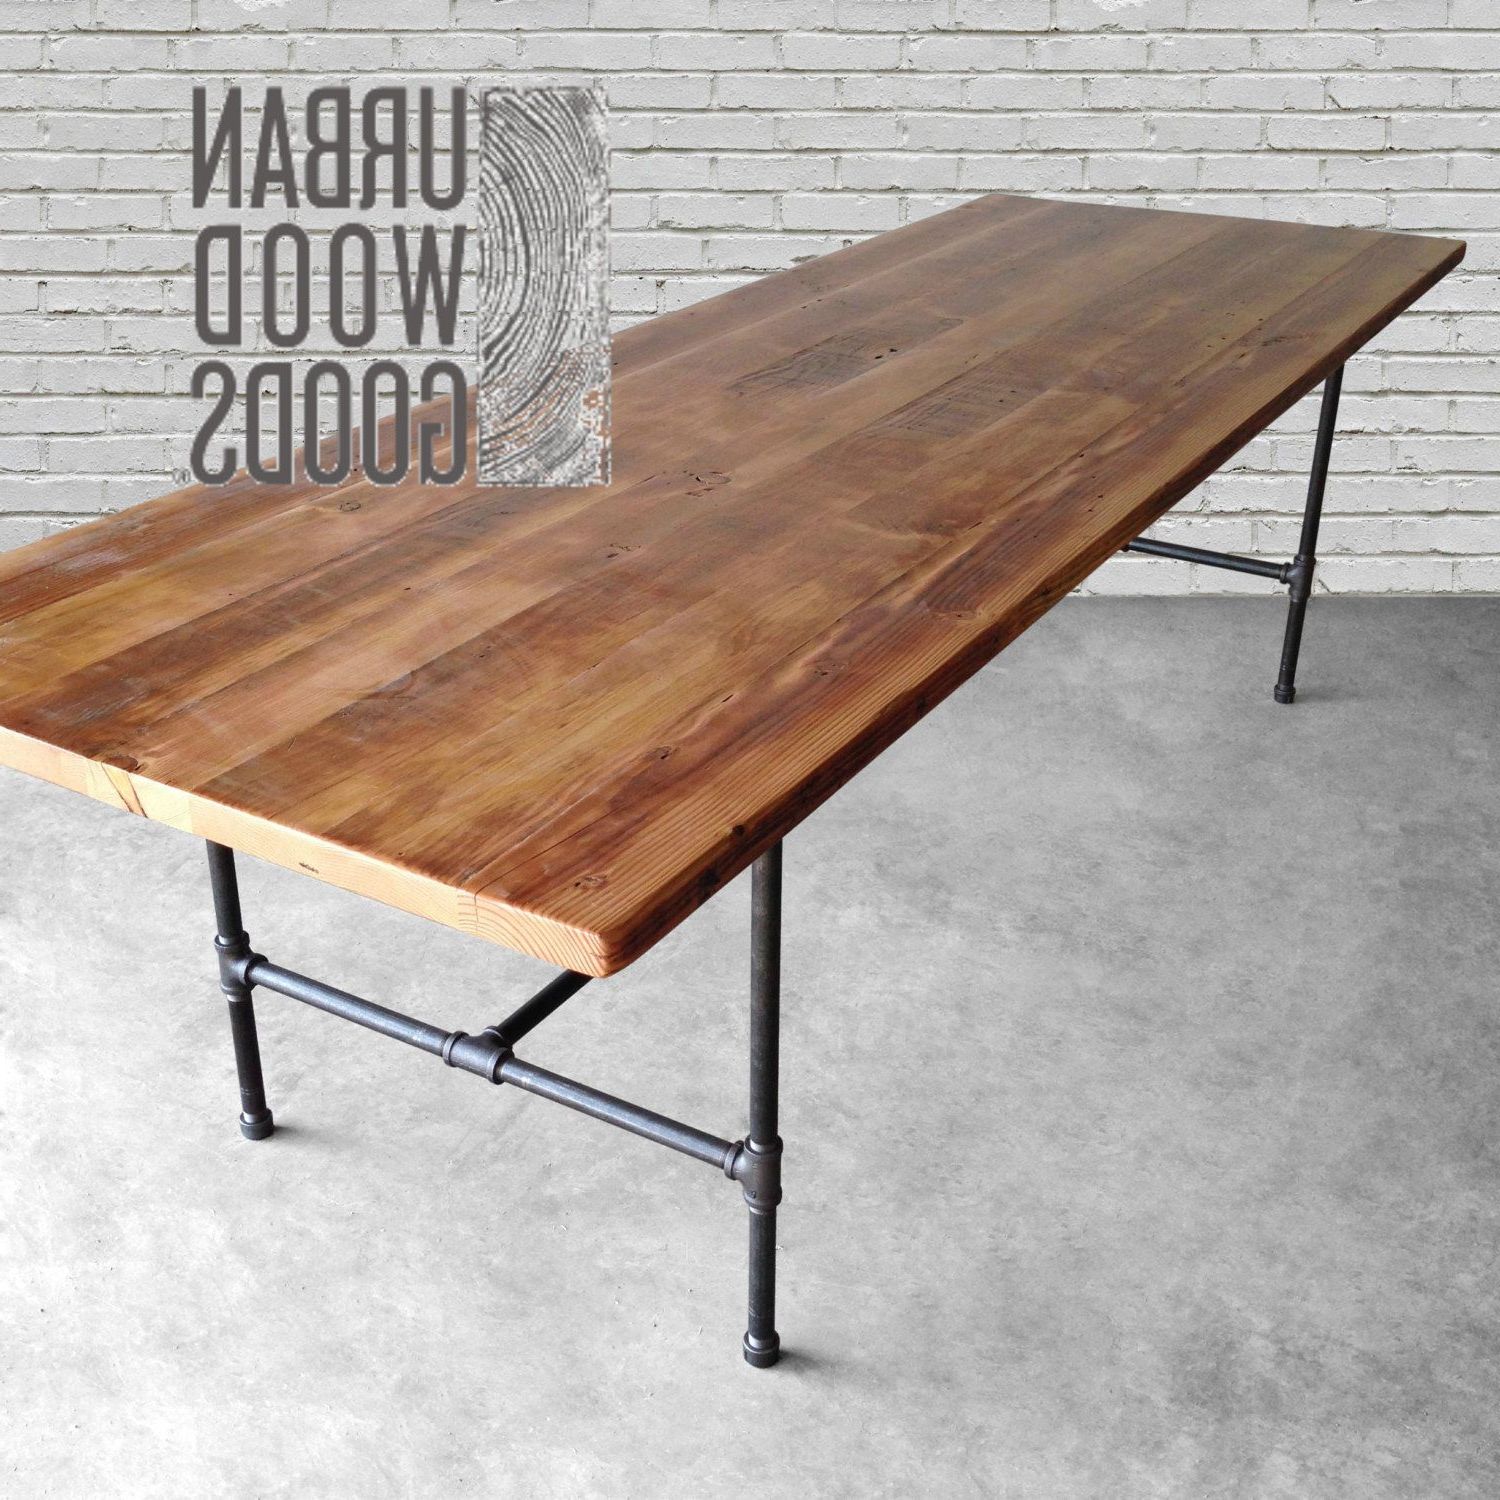 Newest Iron Wood Dining Tables With Metal Legs Regarding Reclaimed Wood Furniture Dining Tables Desks (View 1 of 30)